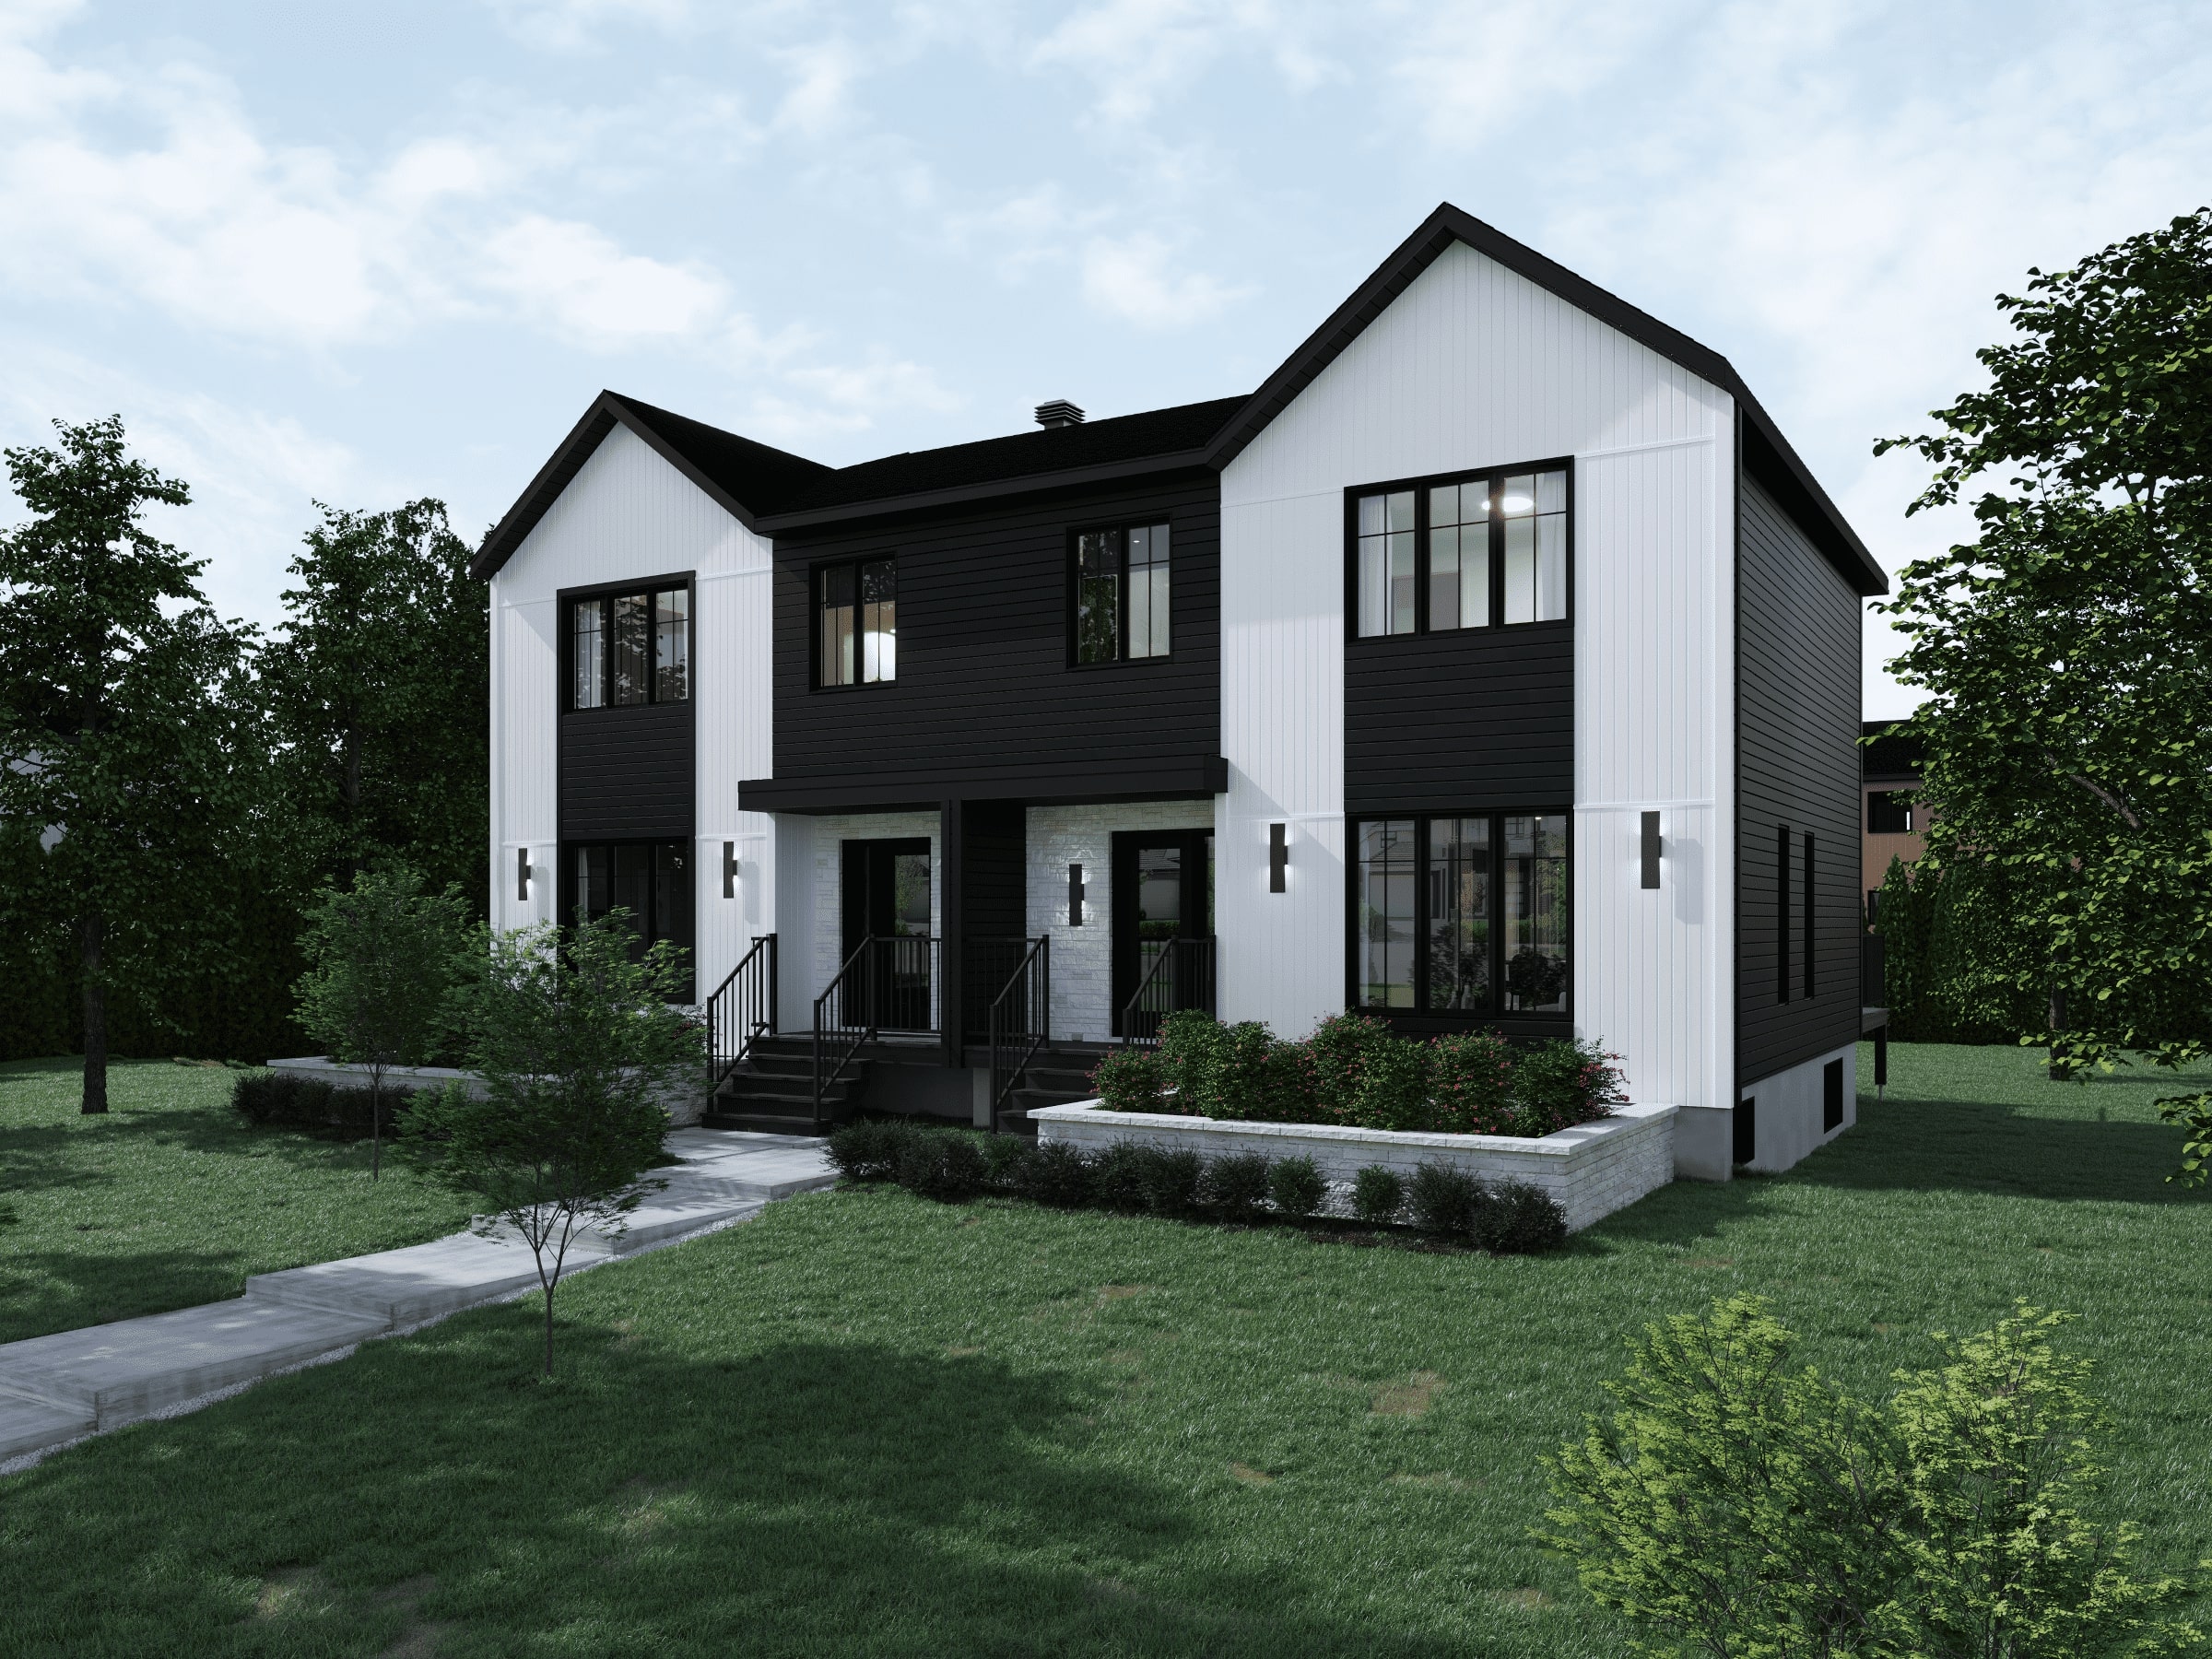 Dyade is a Farmhouse-style semi-detached model. View of the exterior.